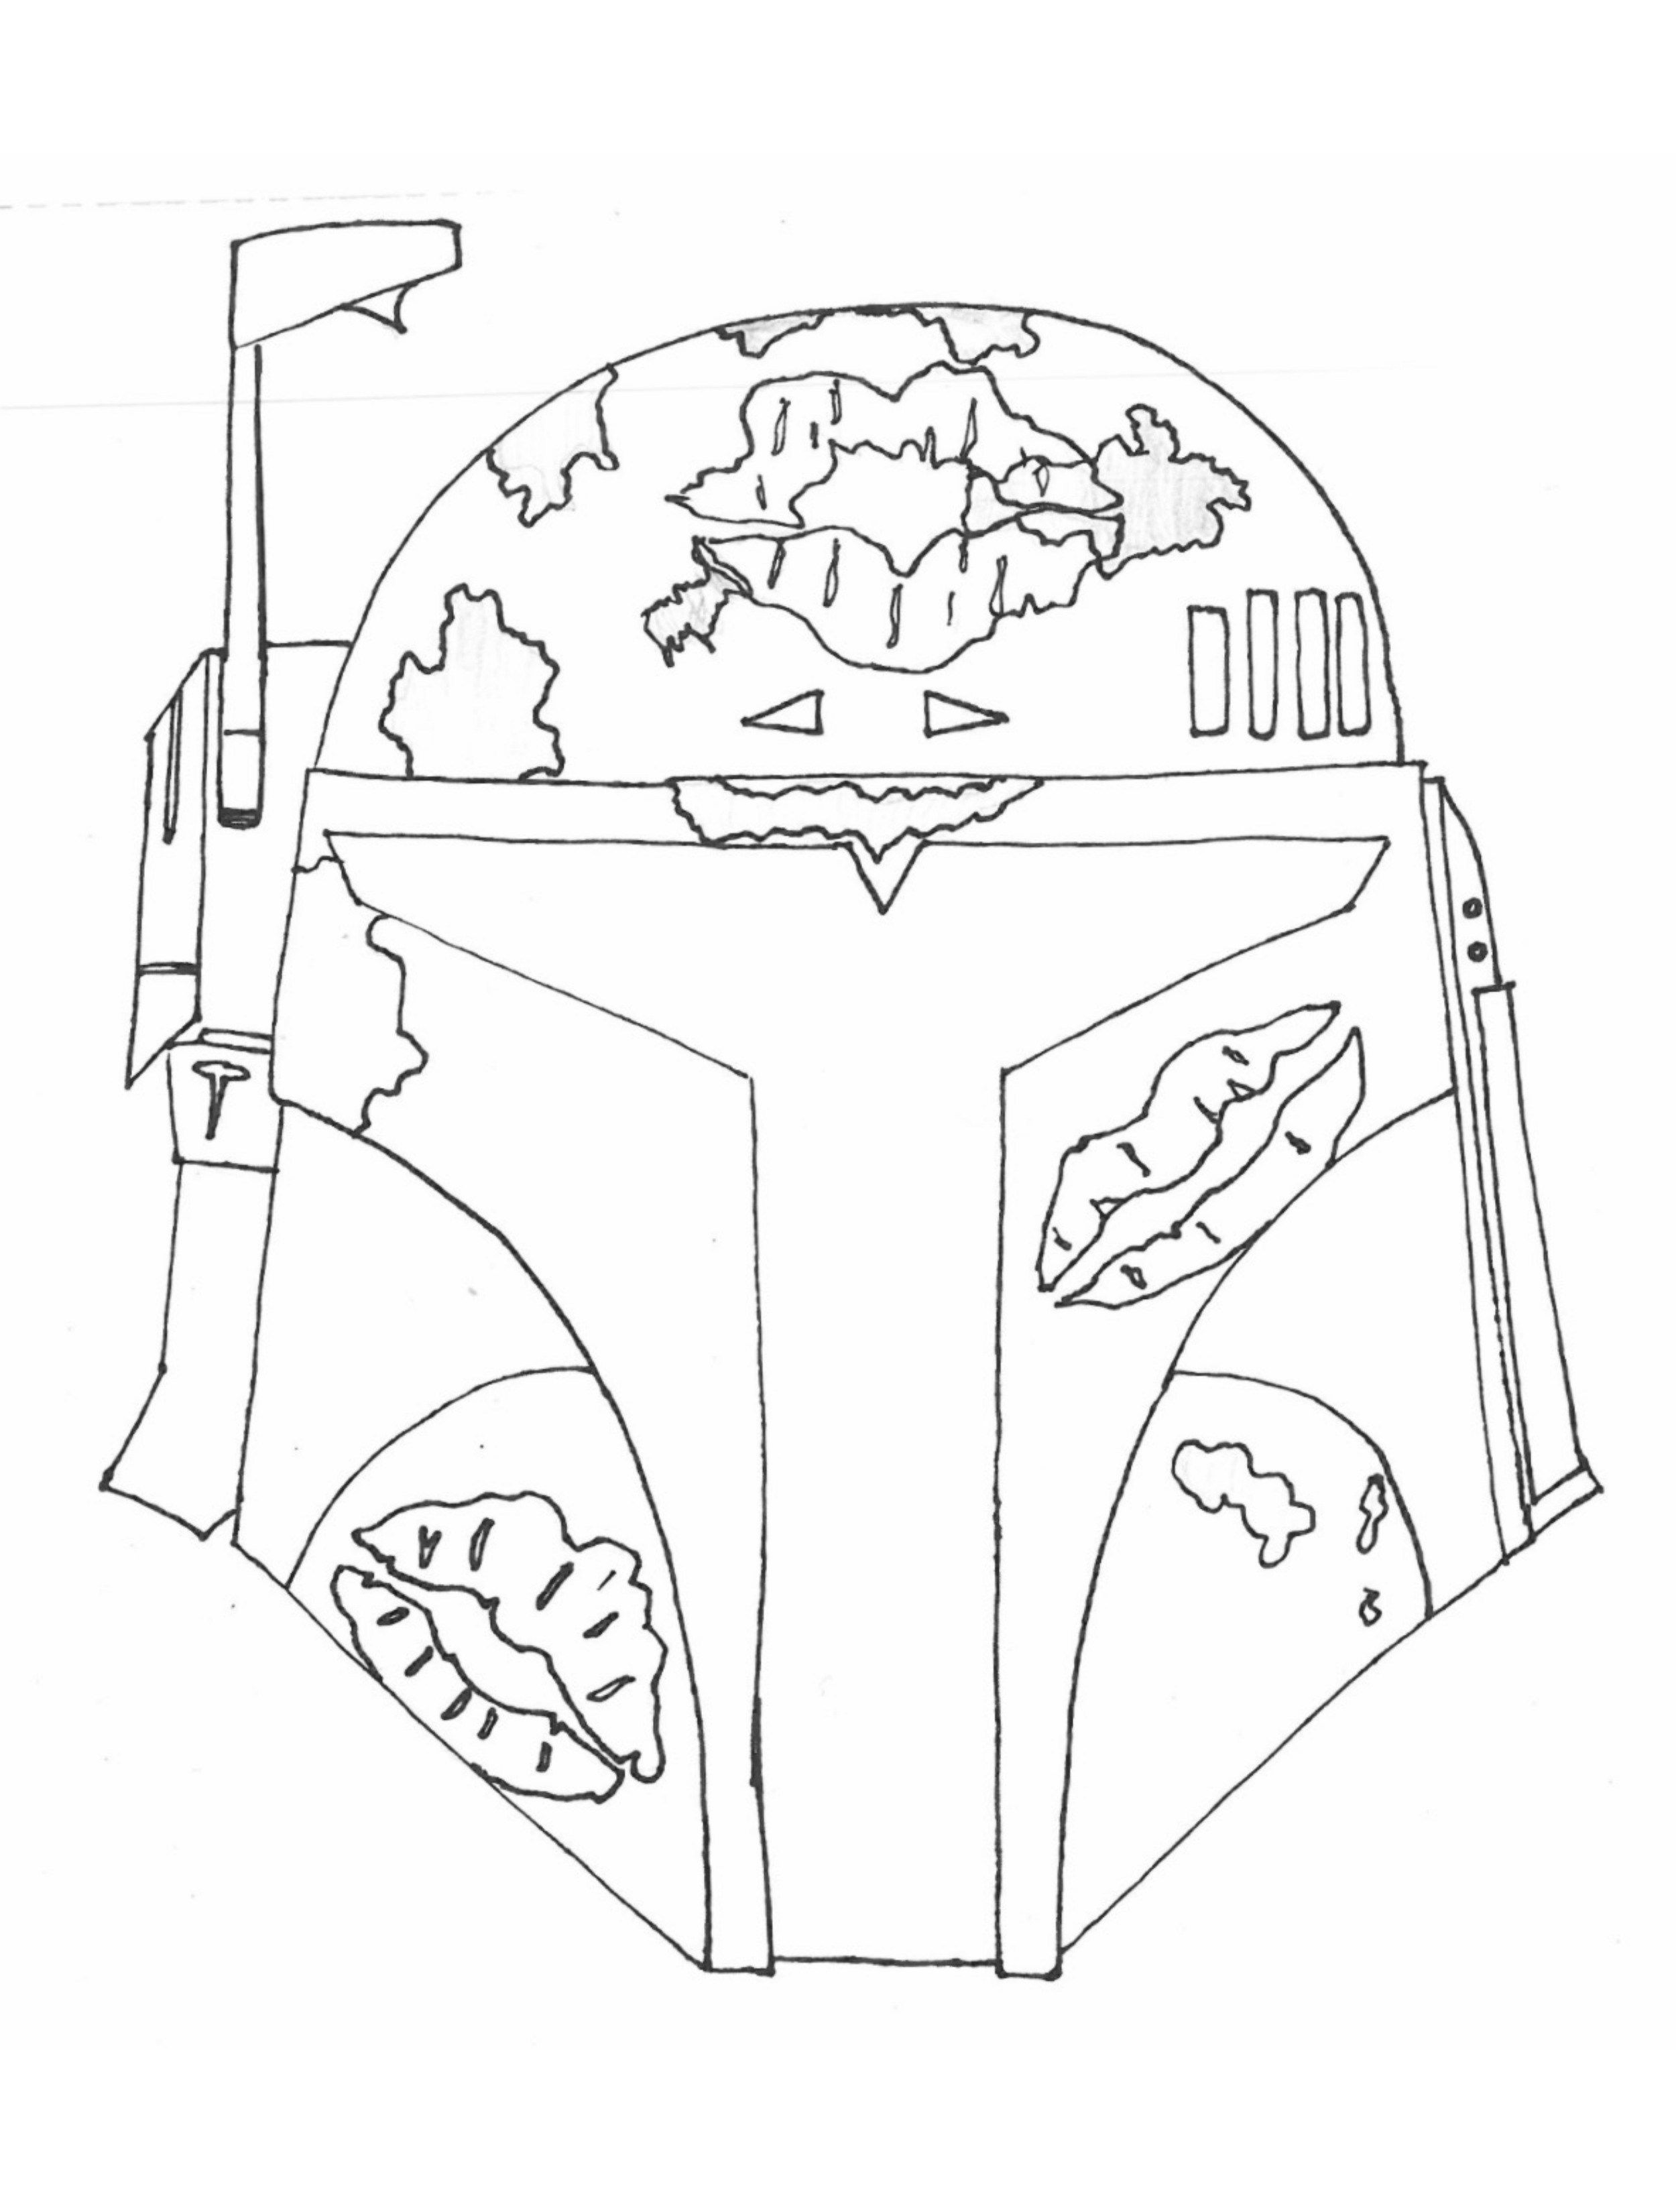 Free printable valentines adult coloring pages inspired by star wars valentines printables free adult coloring pages valentines printables